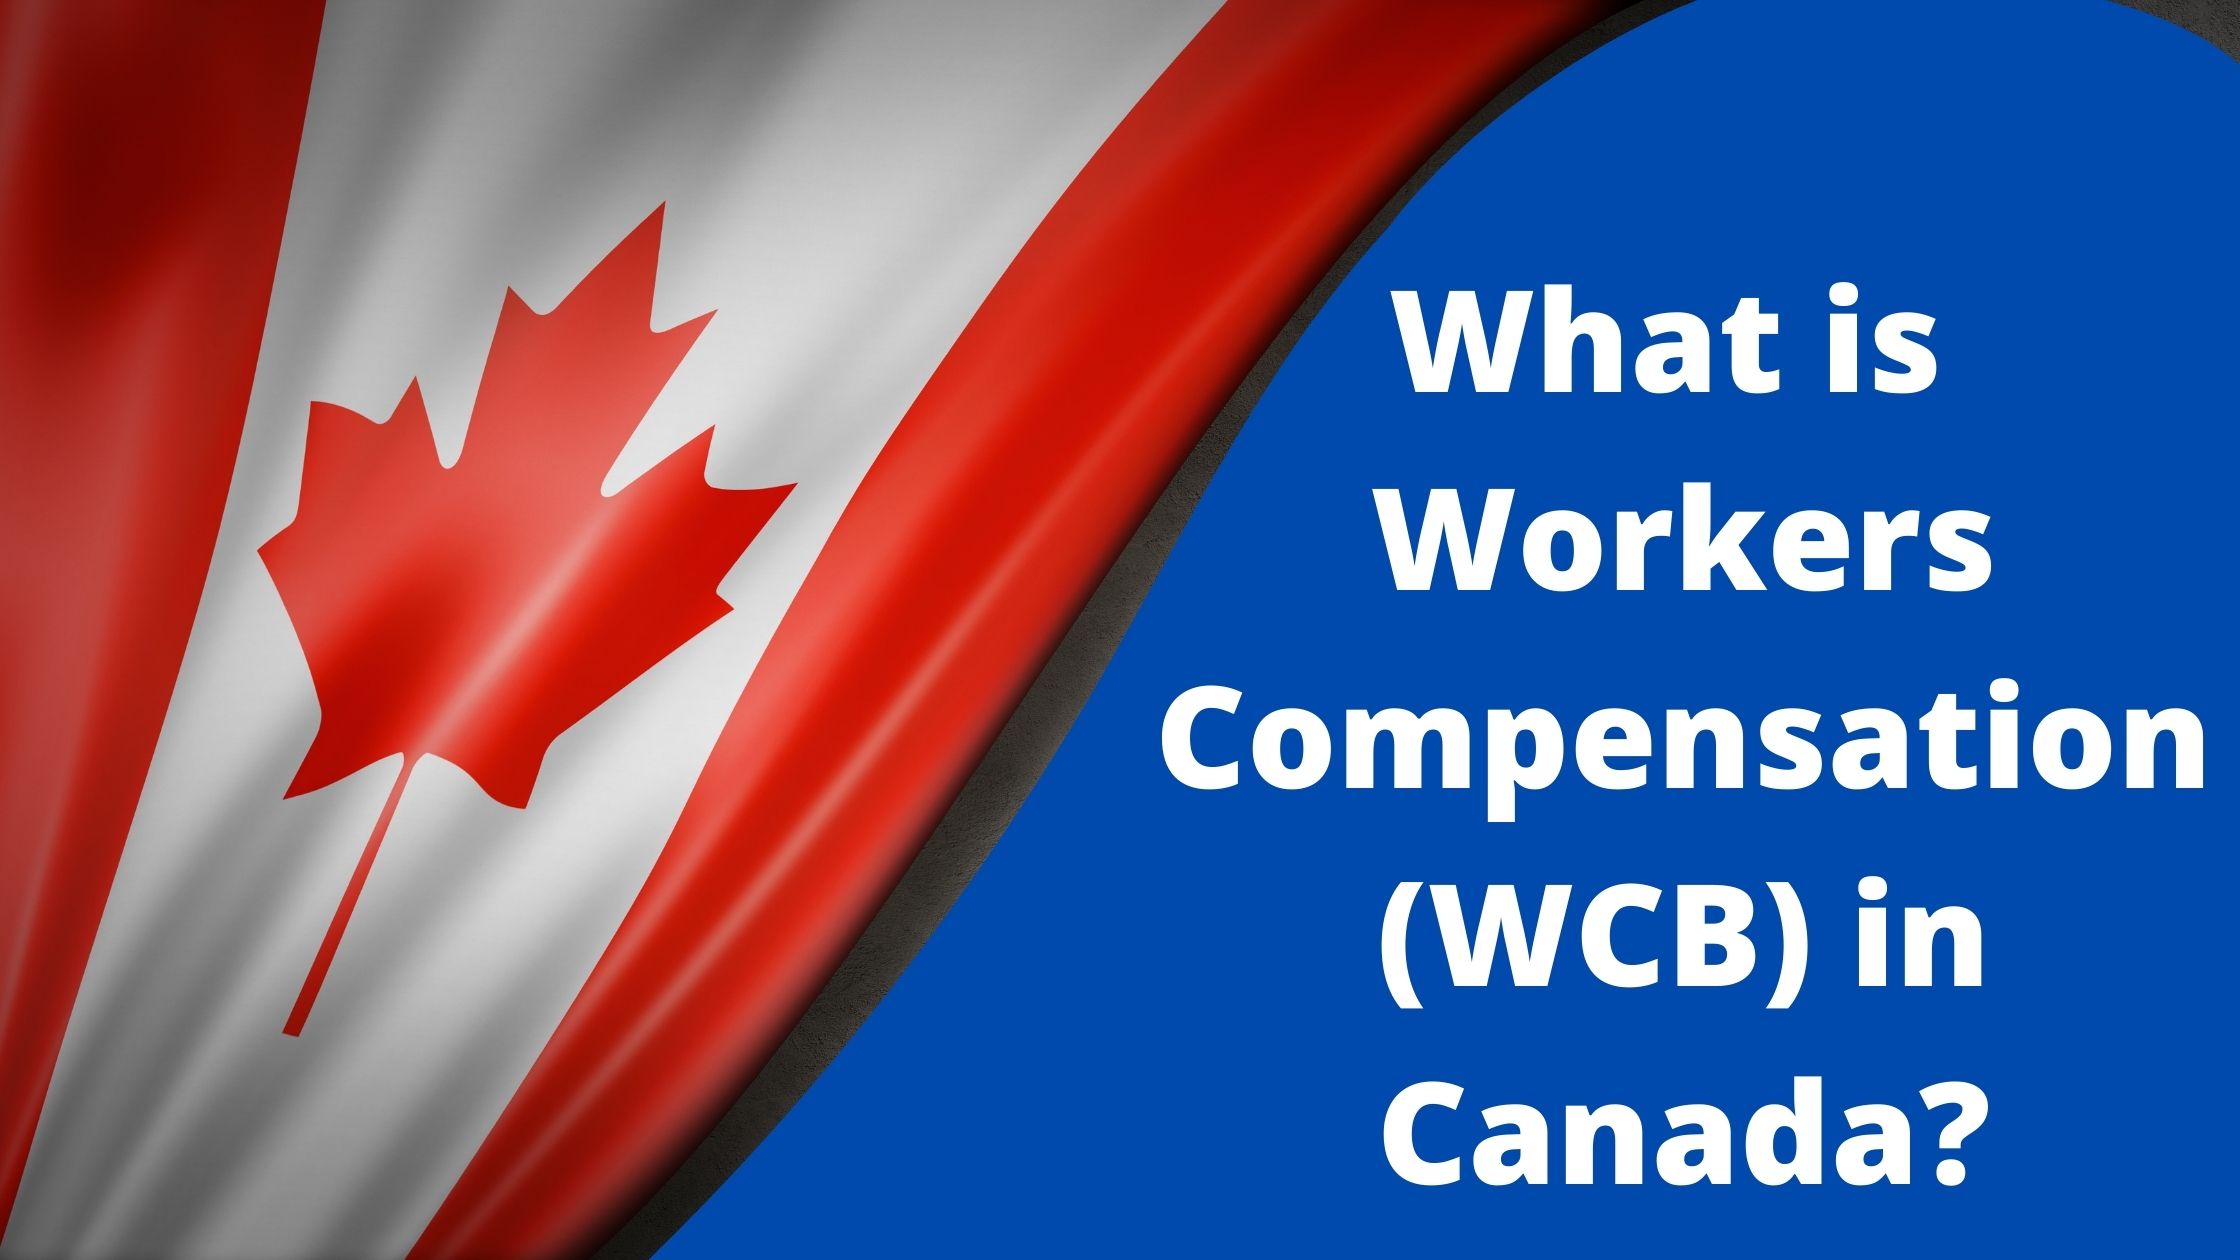 What is Workers Compensation in Canada?